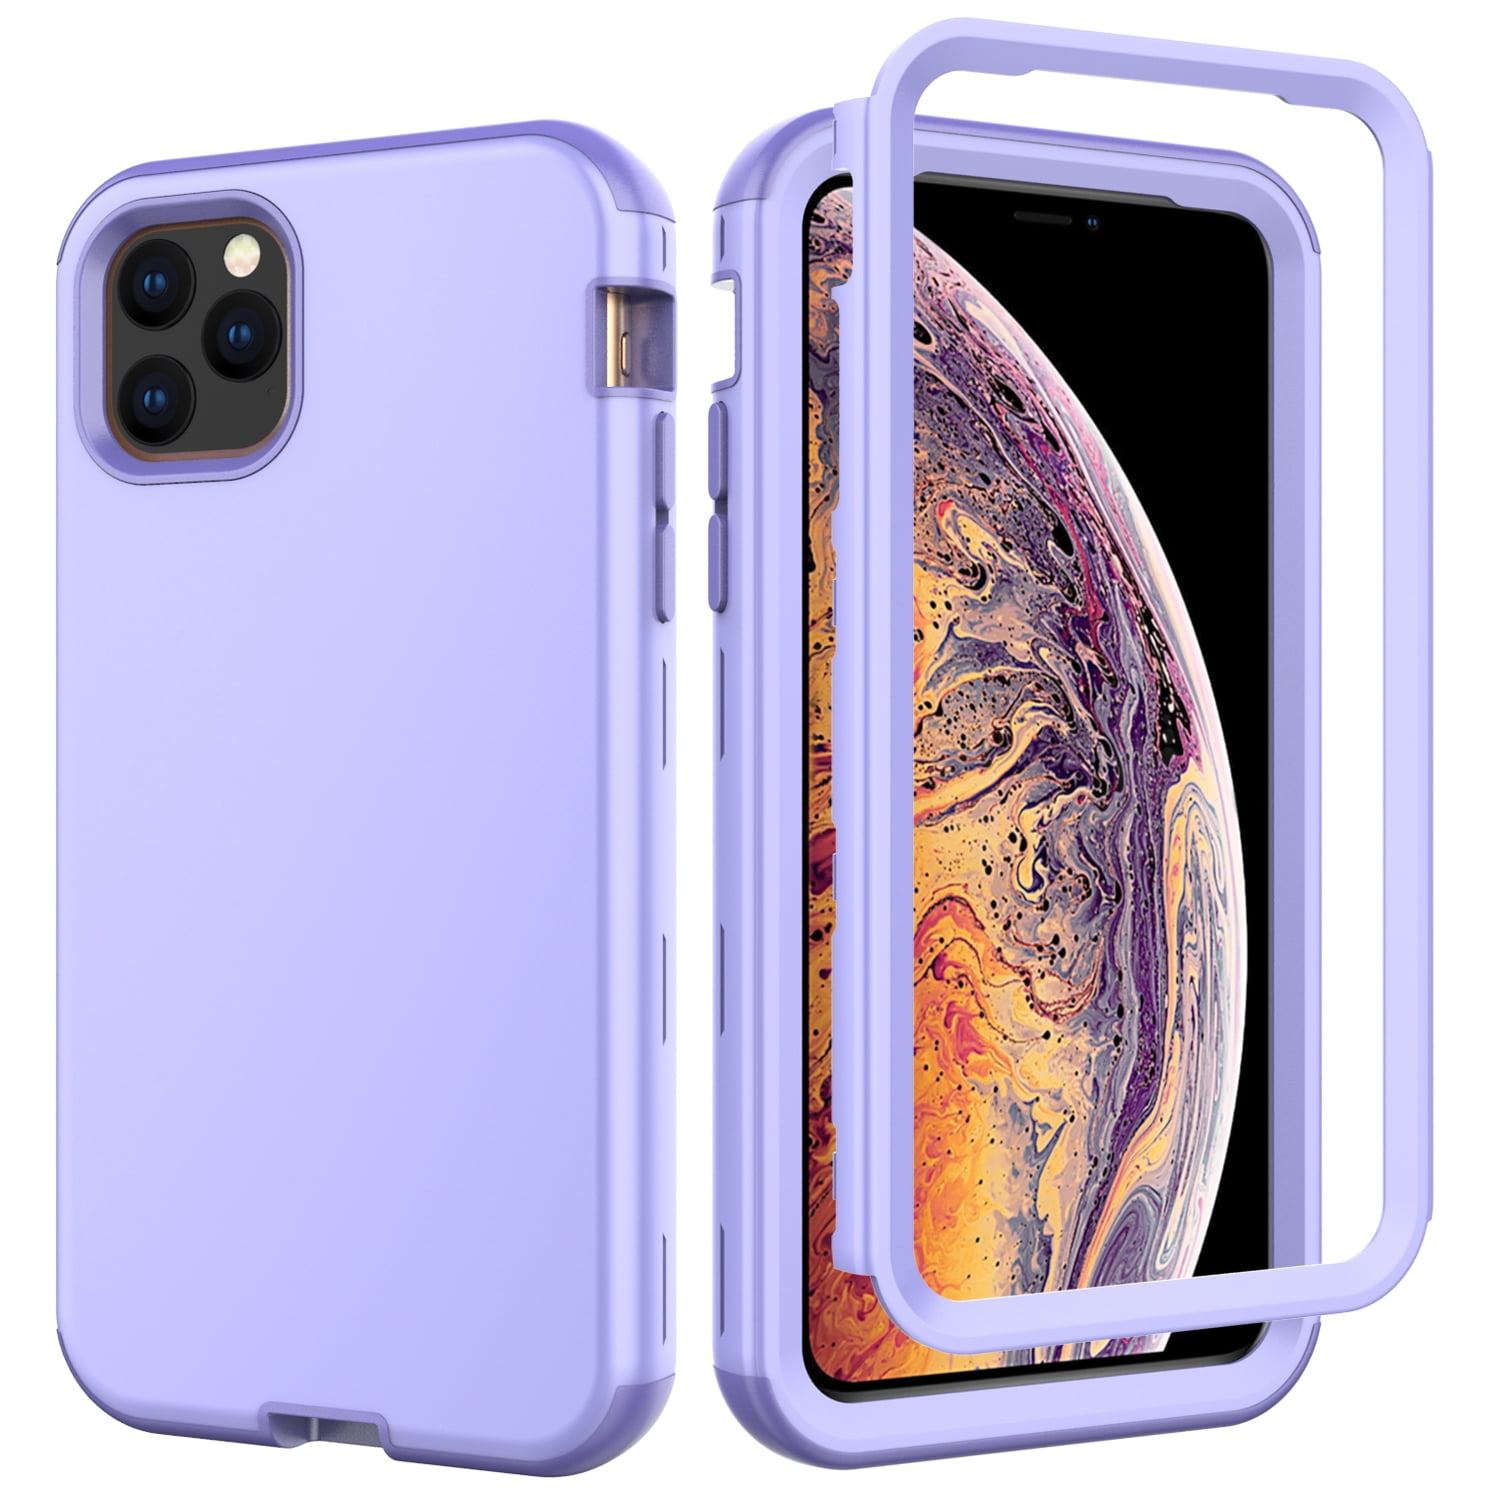 heavy-duty-3-in-1-silicone-shockproof-case-for-iphone-11-pro-light